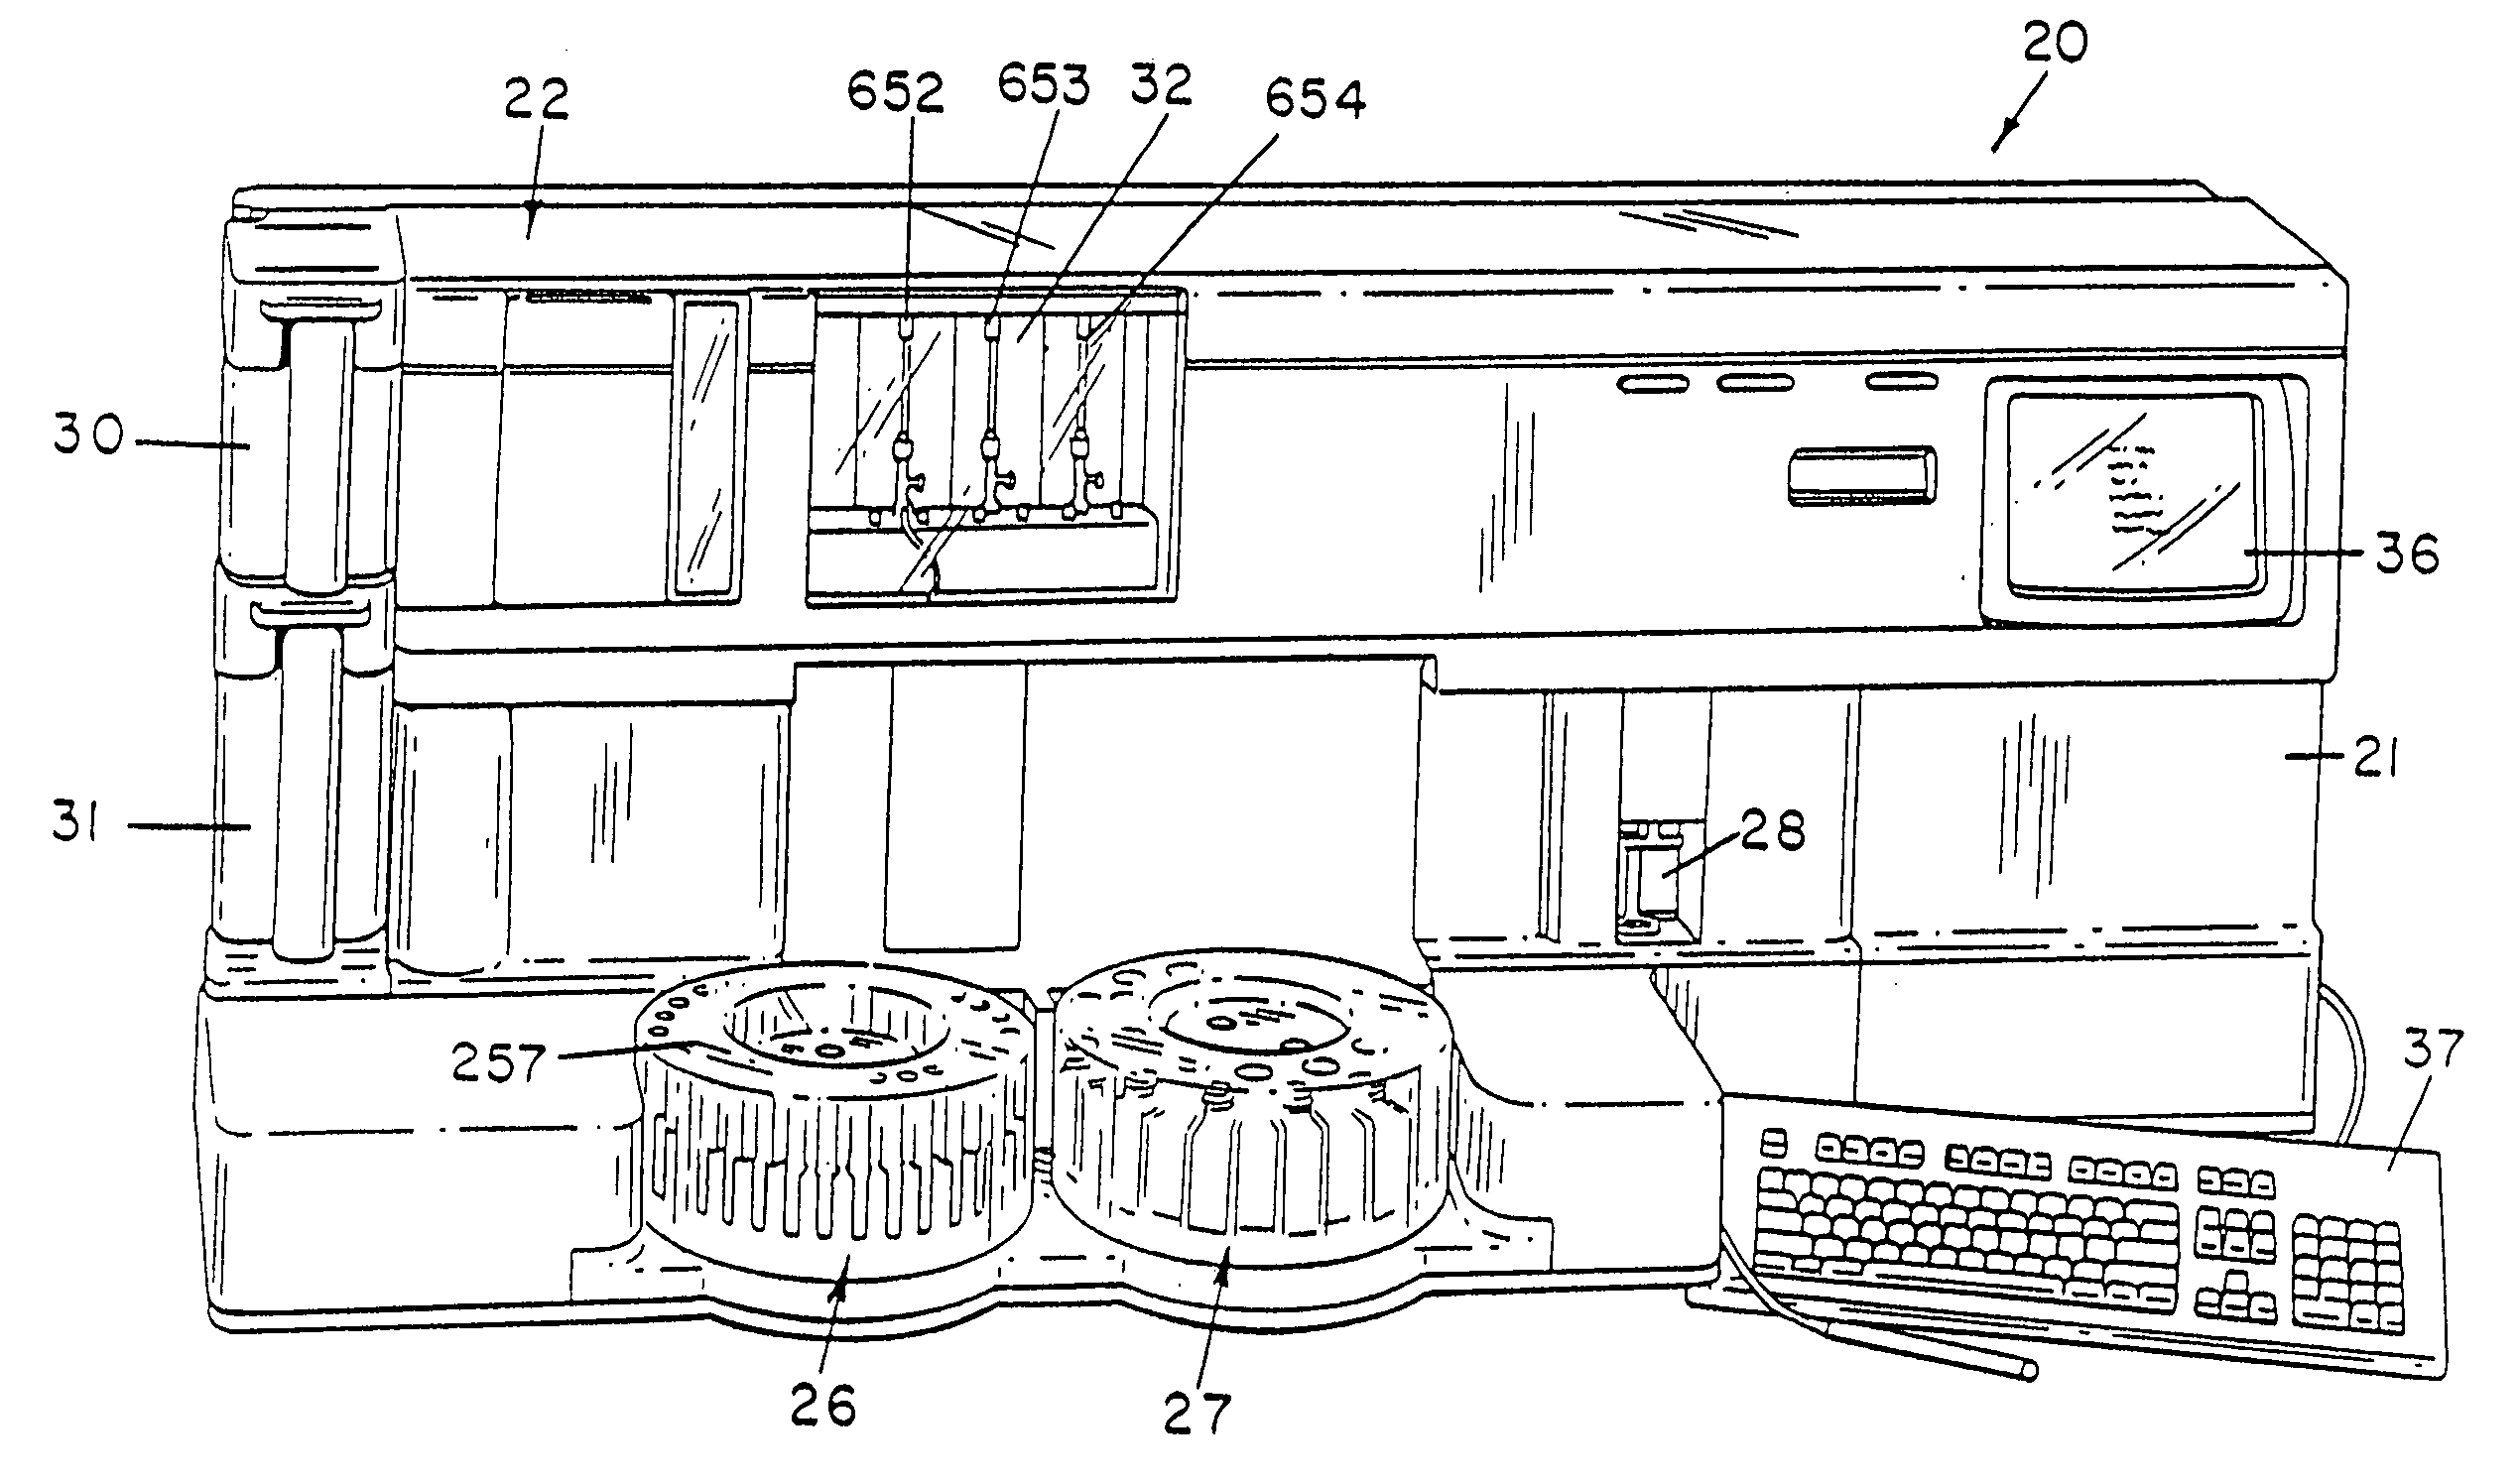 Fluid handling apparatus for an automated analyzer